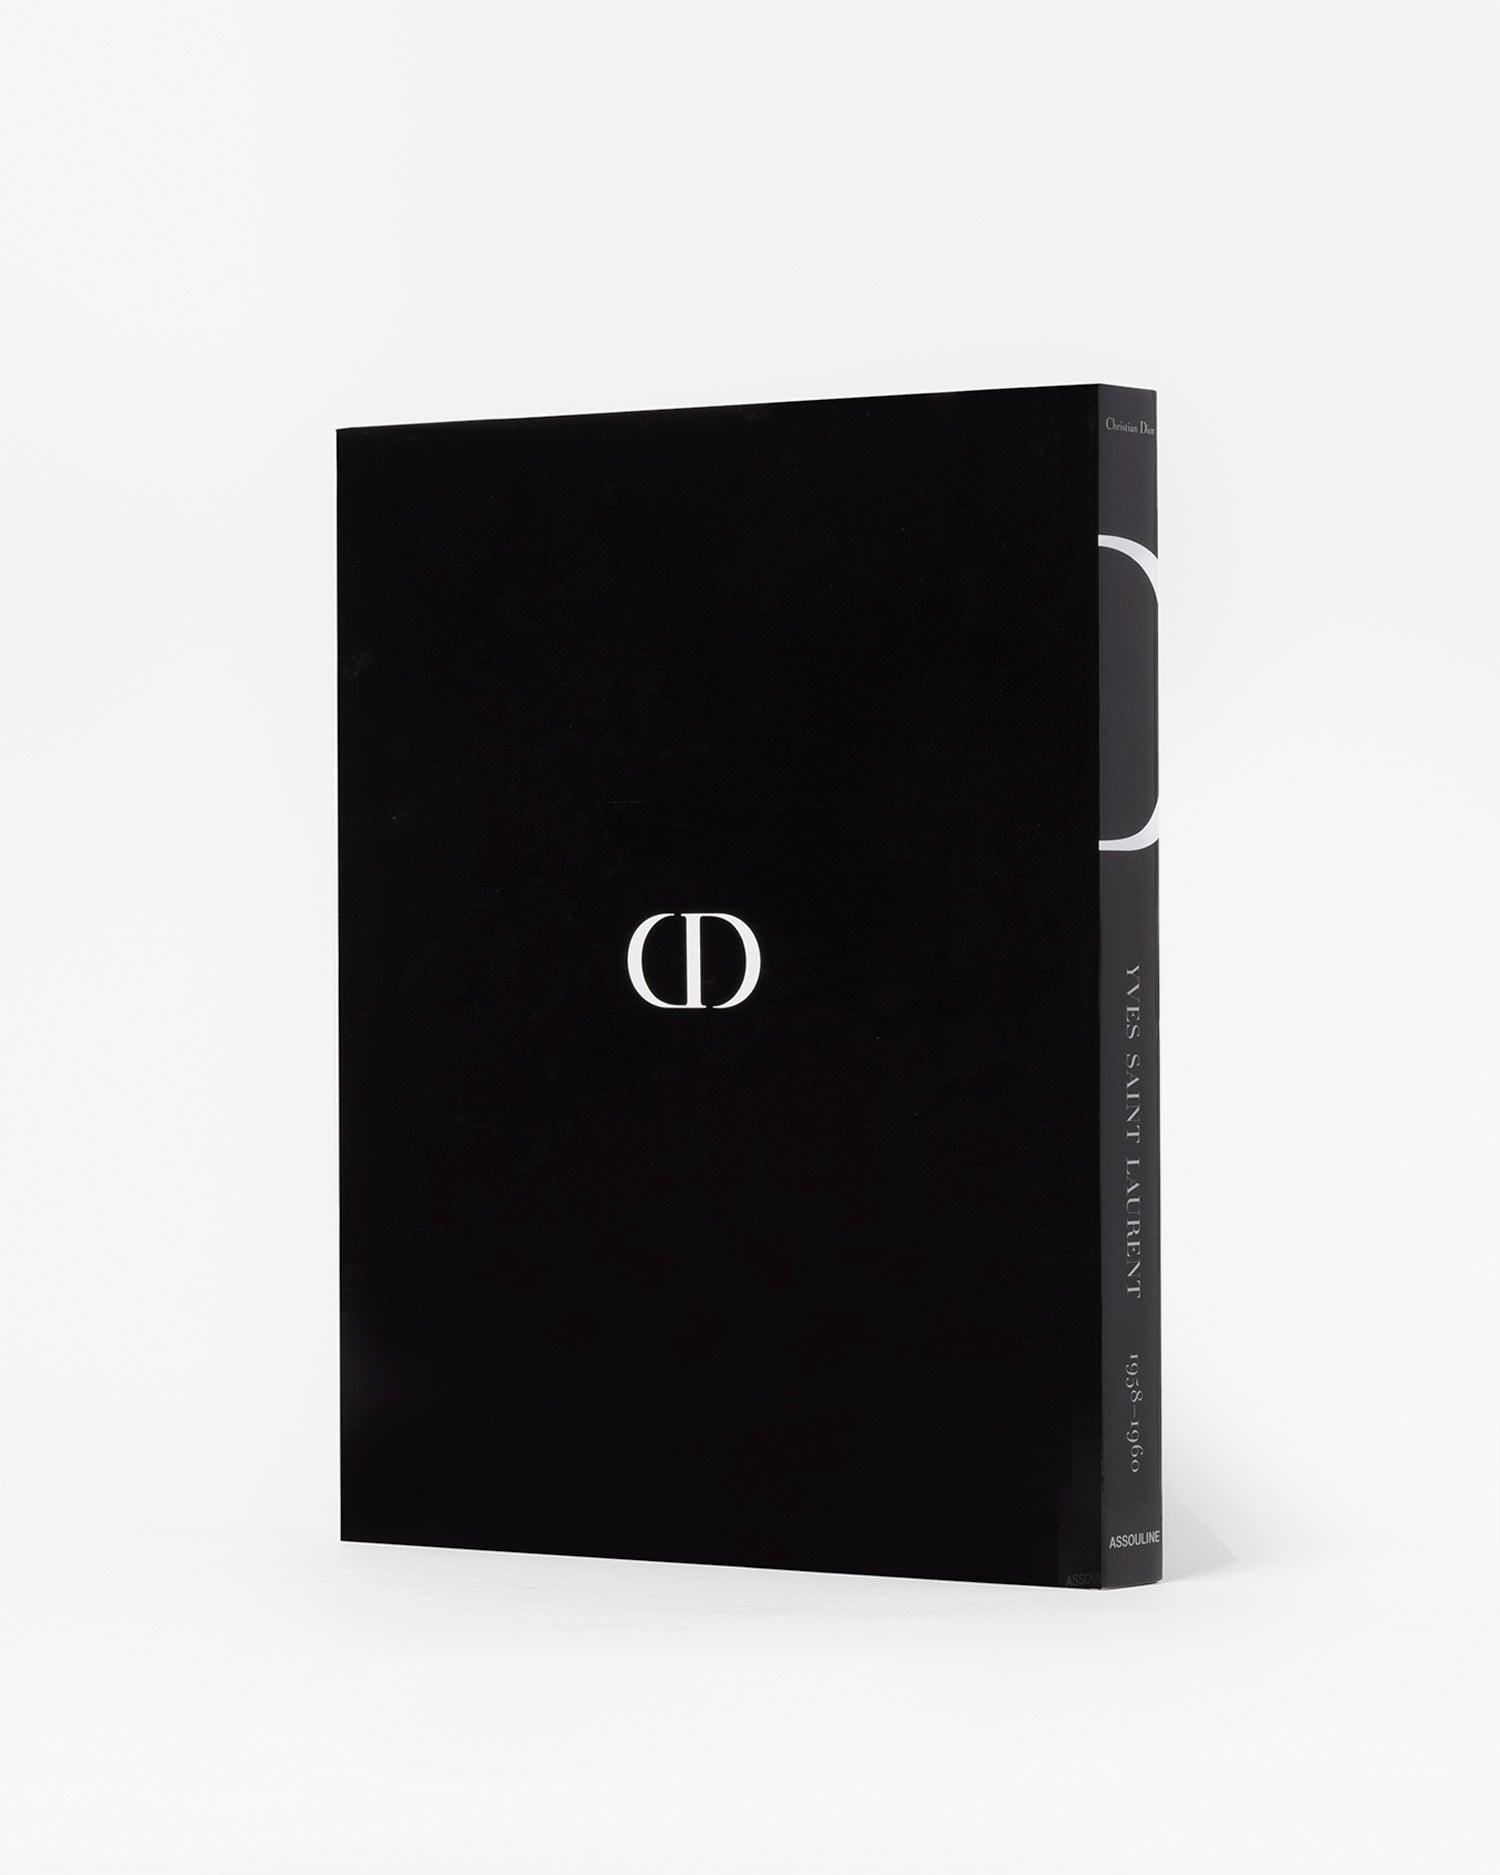 Dior by Yves Saint Laurent book by Laurence Benaïm | ASSOULINE